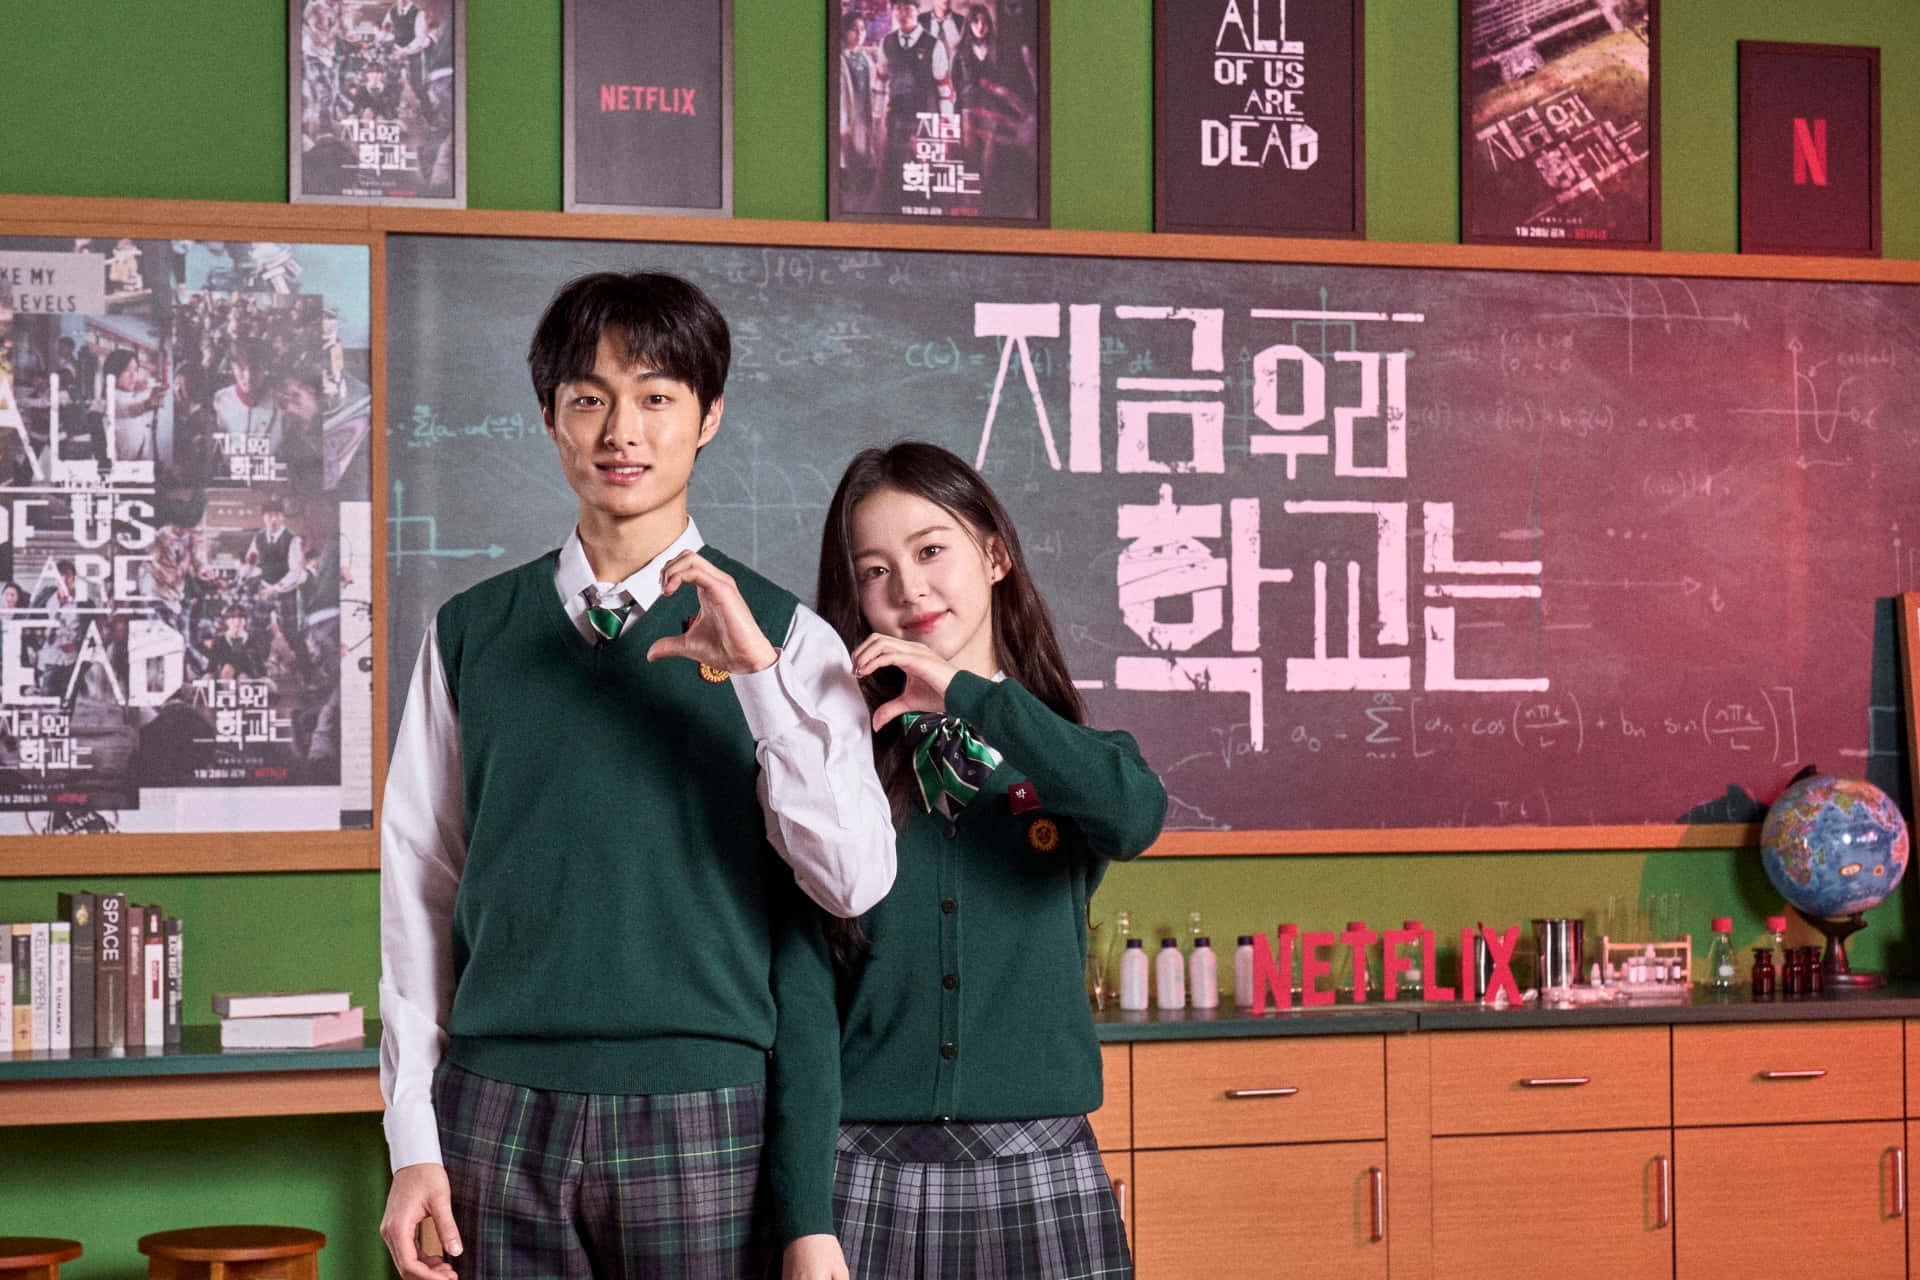 A Couple In School Uniforms Standing In Front Of A Chalkboard